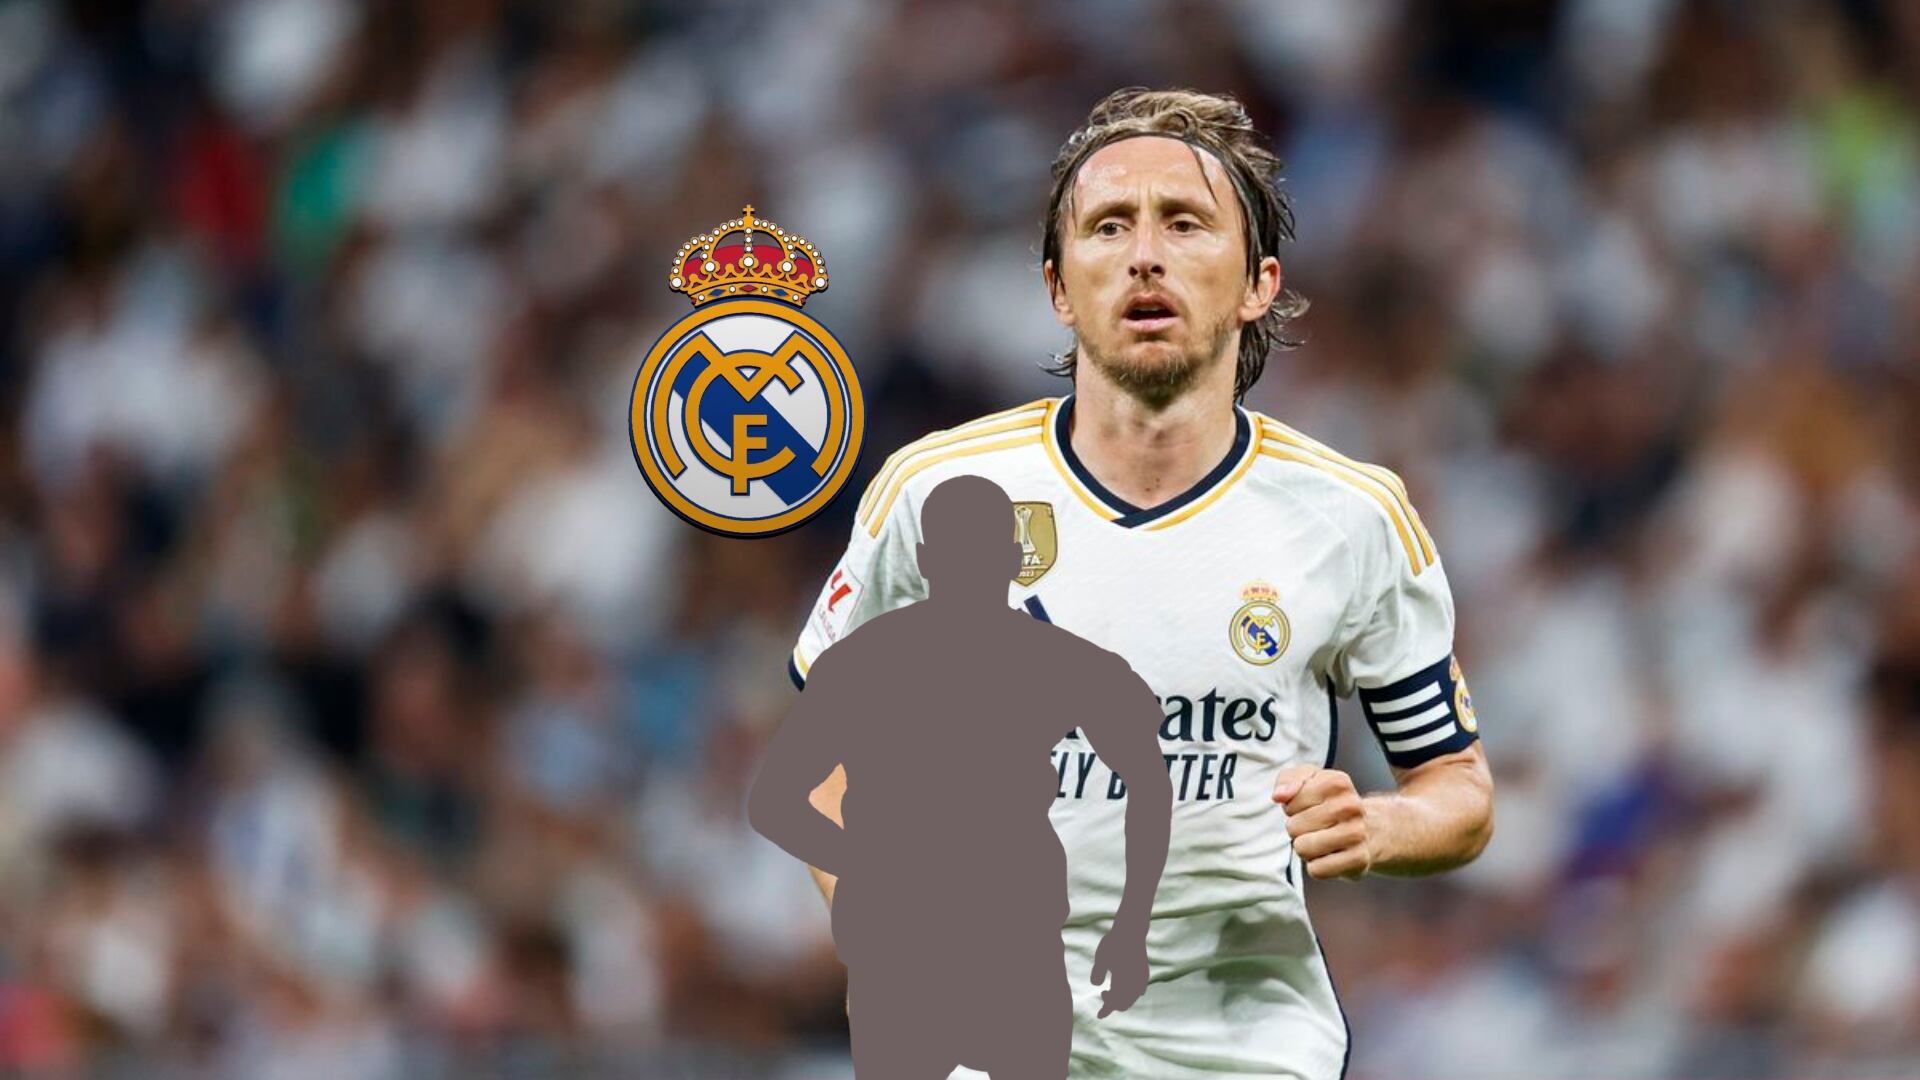 While Modric might stay, the first Real Madrid player who would leave the team with Mbappé's arrival